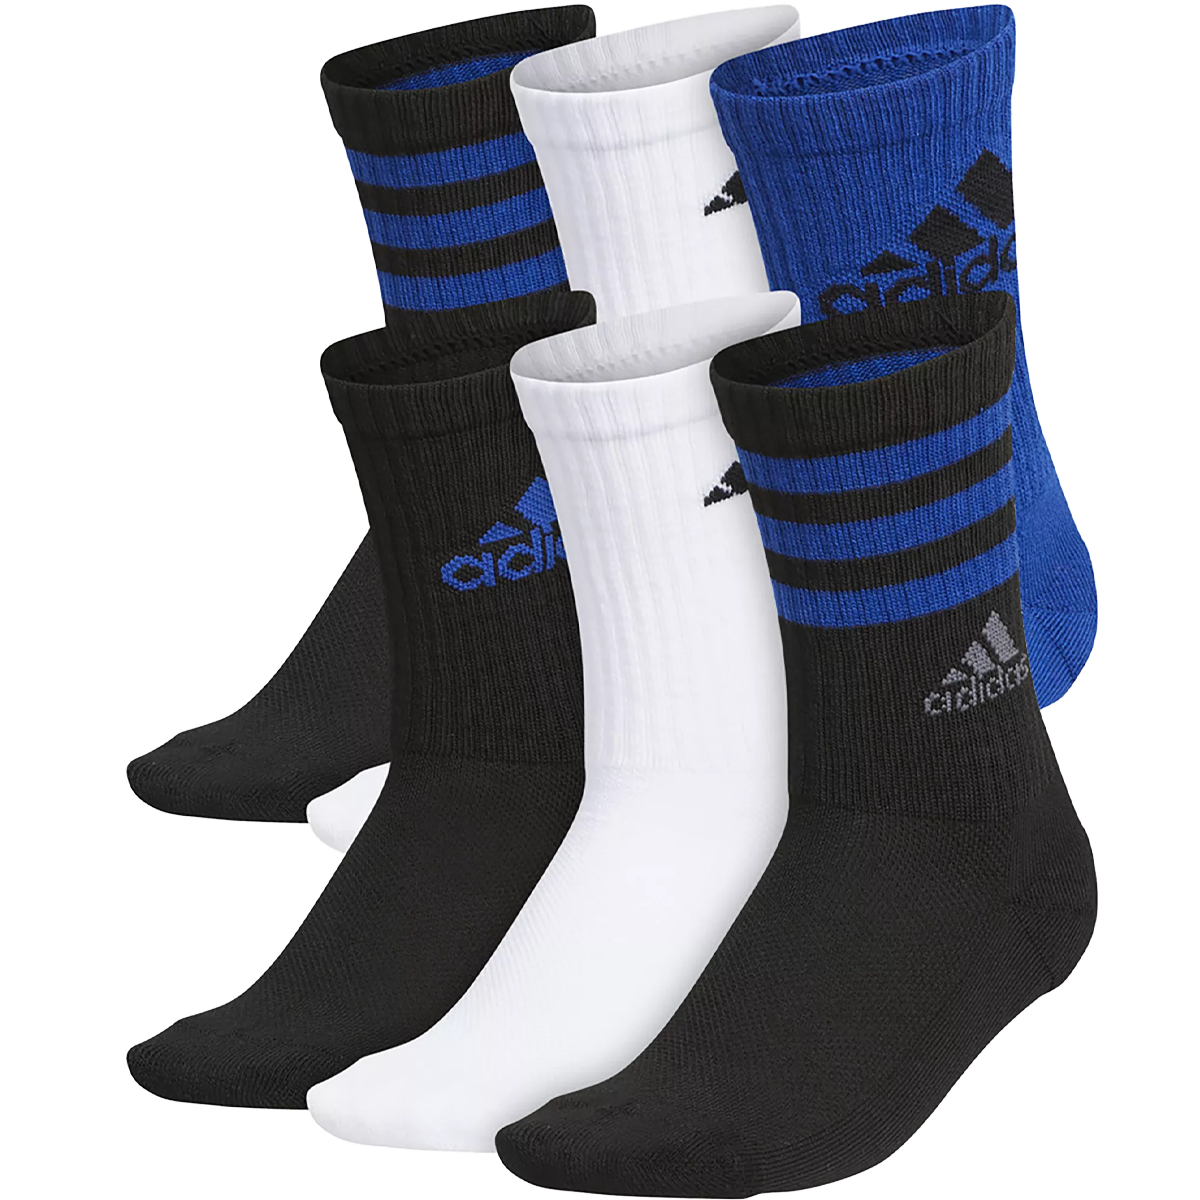 Youth Adidas Cushion Mixed 6-Pack Crew alternate view